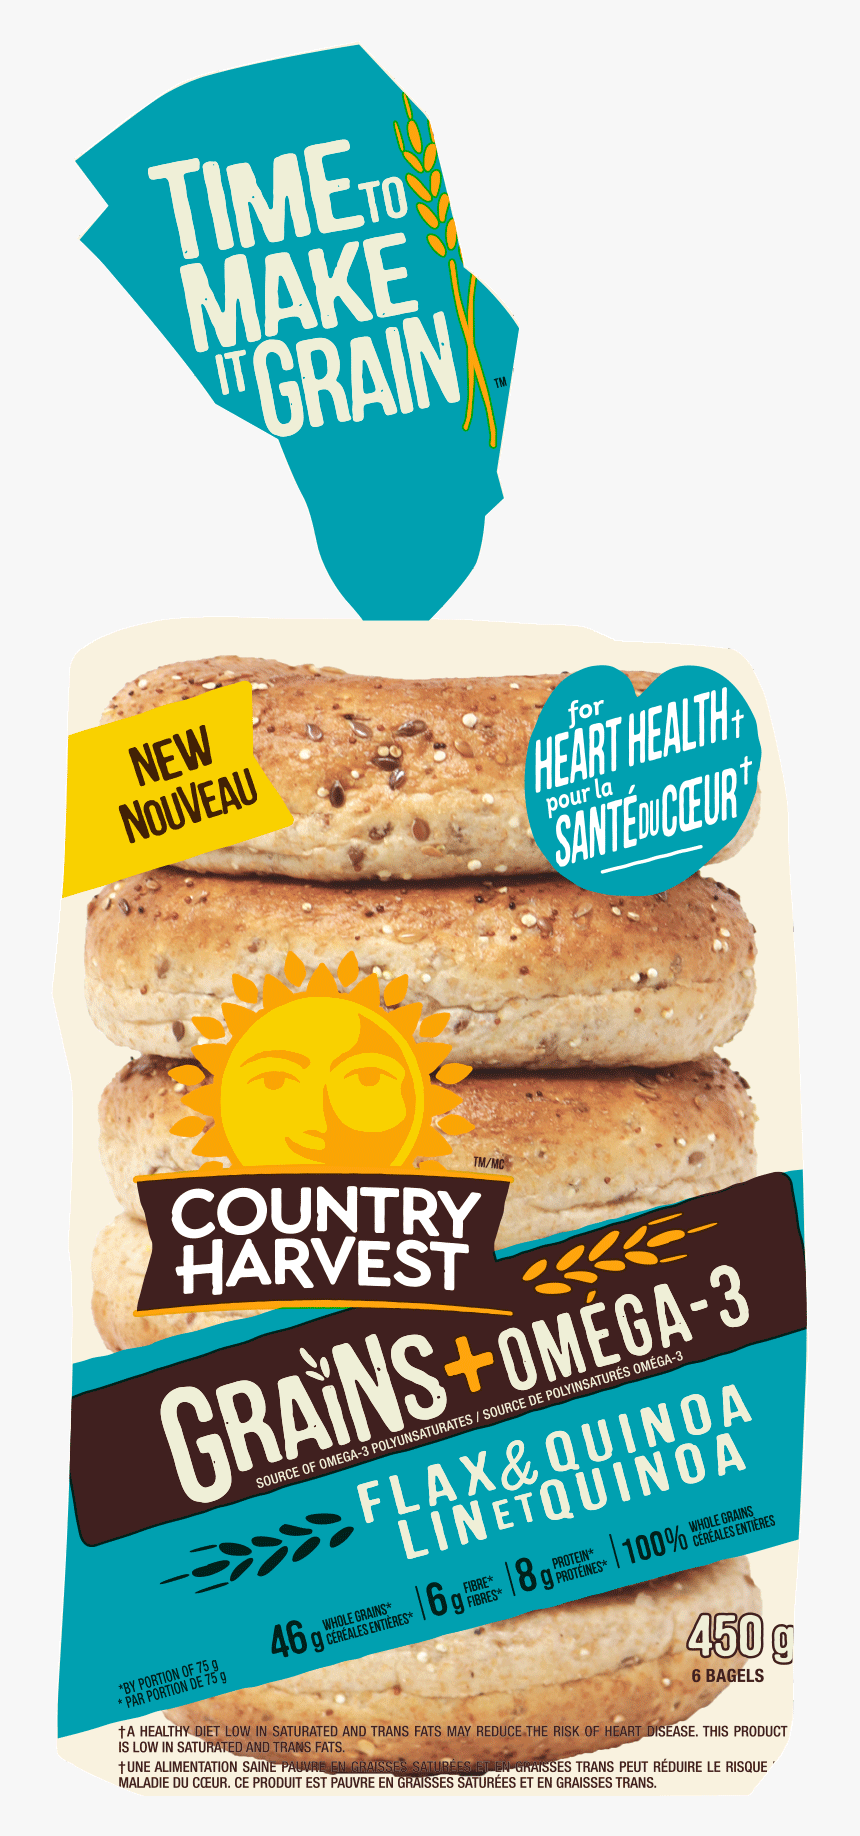 Country Harvest Flax Quinoa Bagel Image - Bun, HD Png Download, Free Download